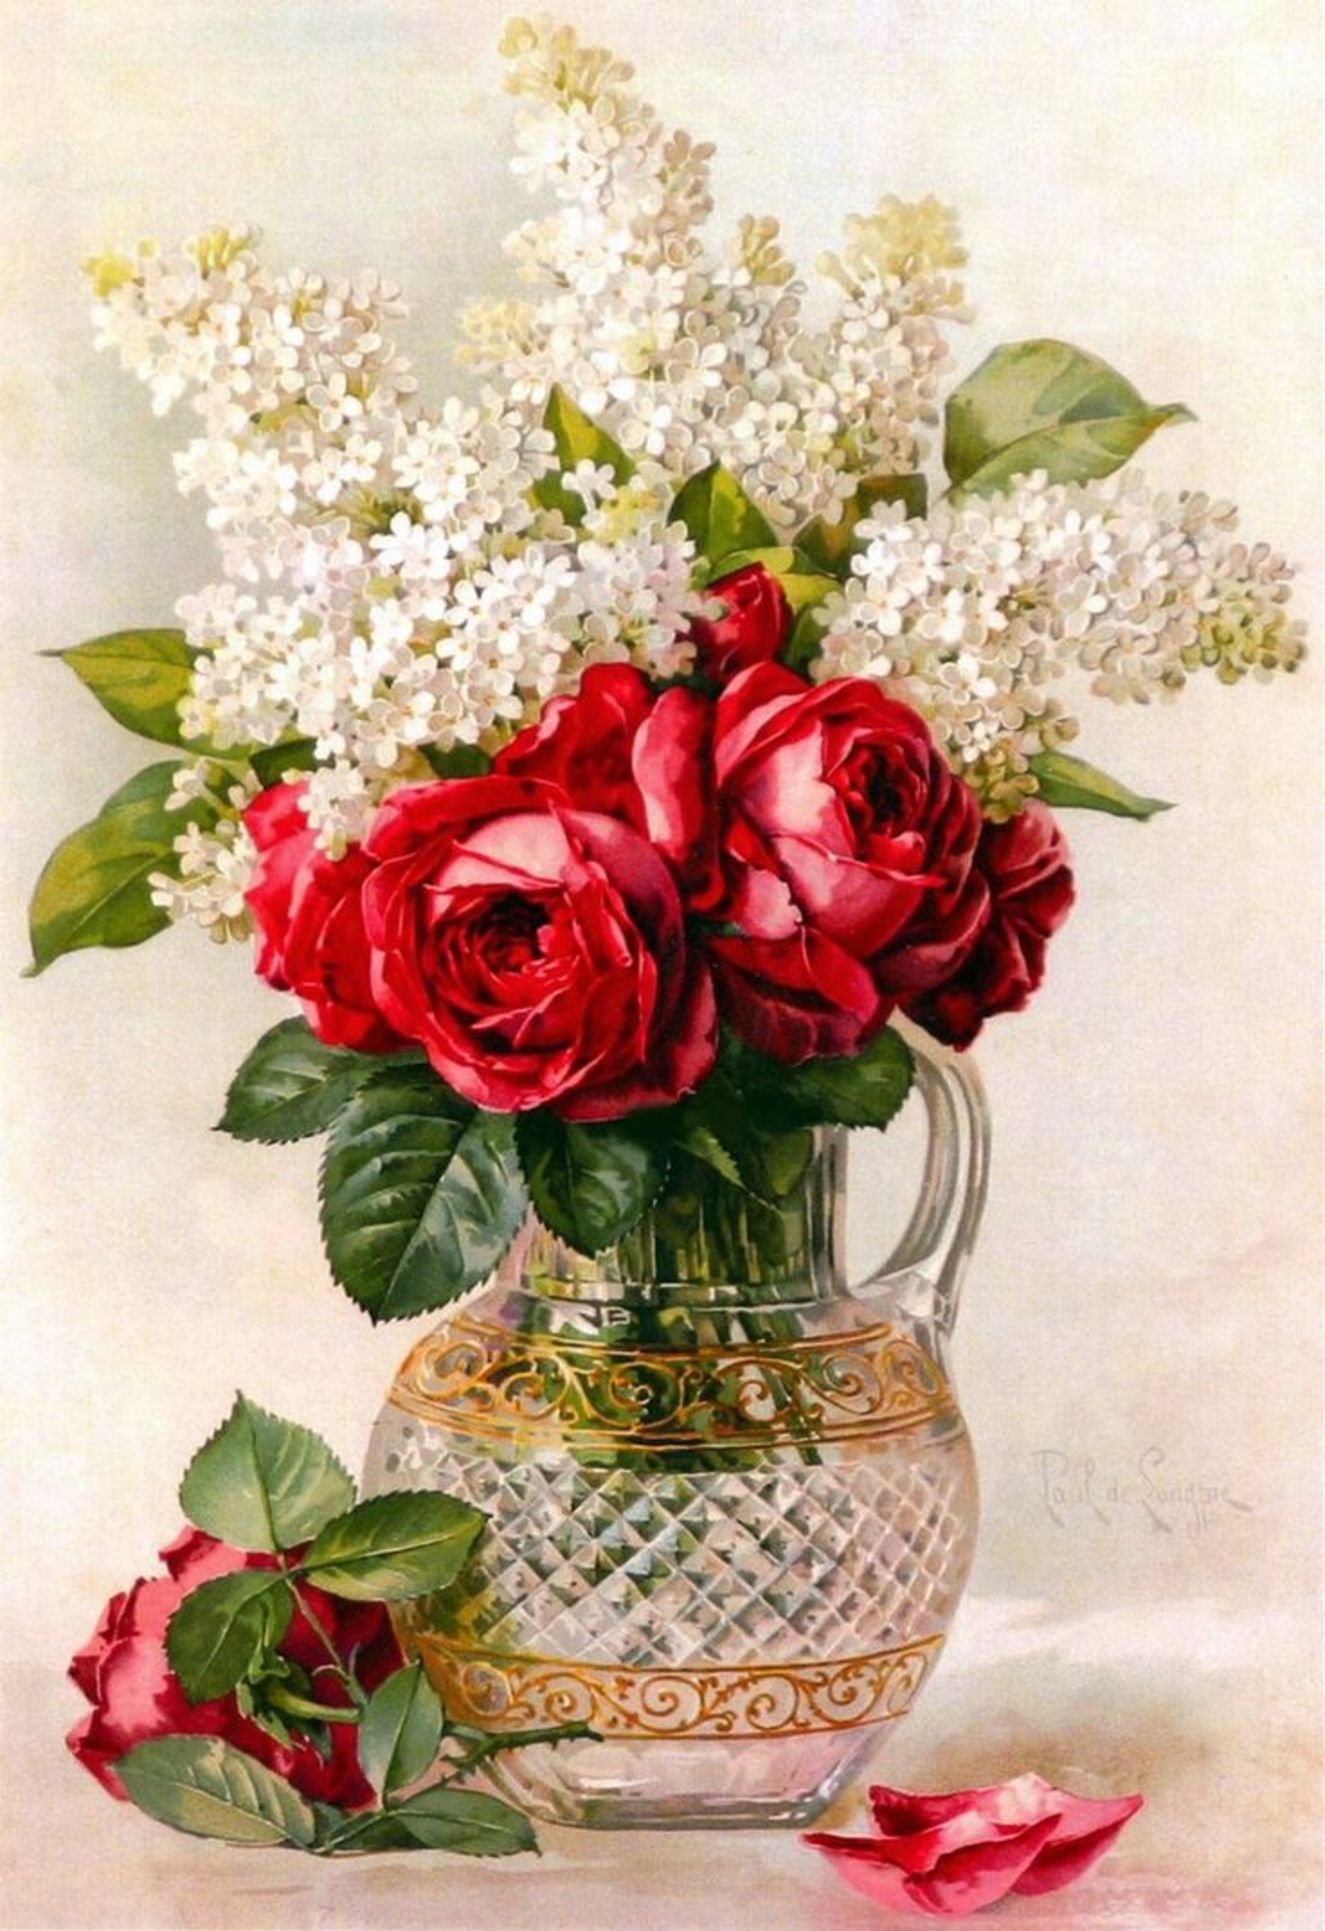 Paul de Longpre - Red roses and white flowers in glass pitcher